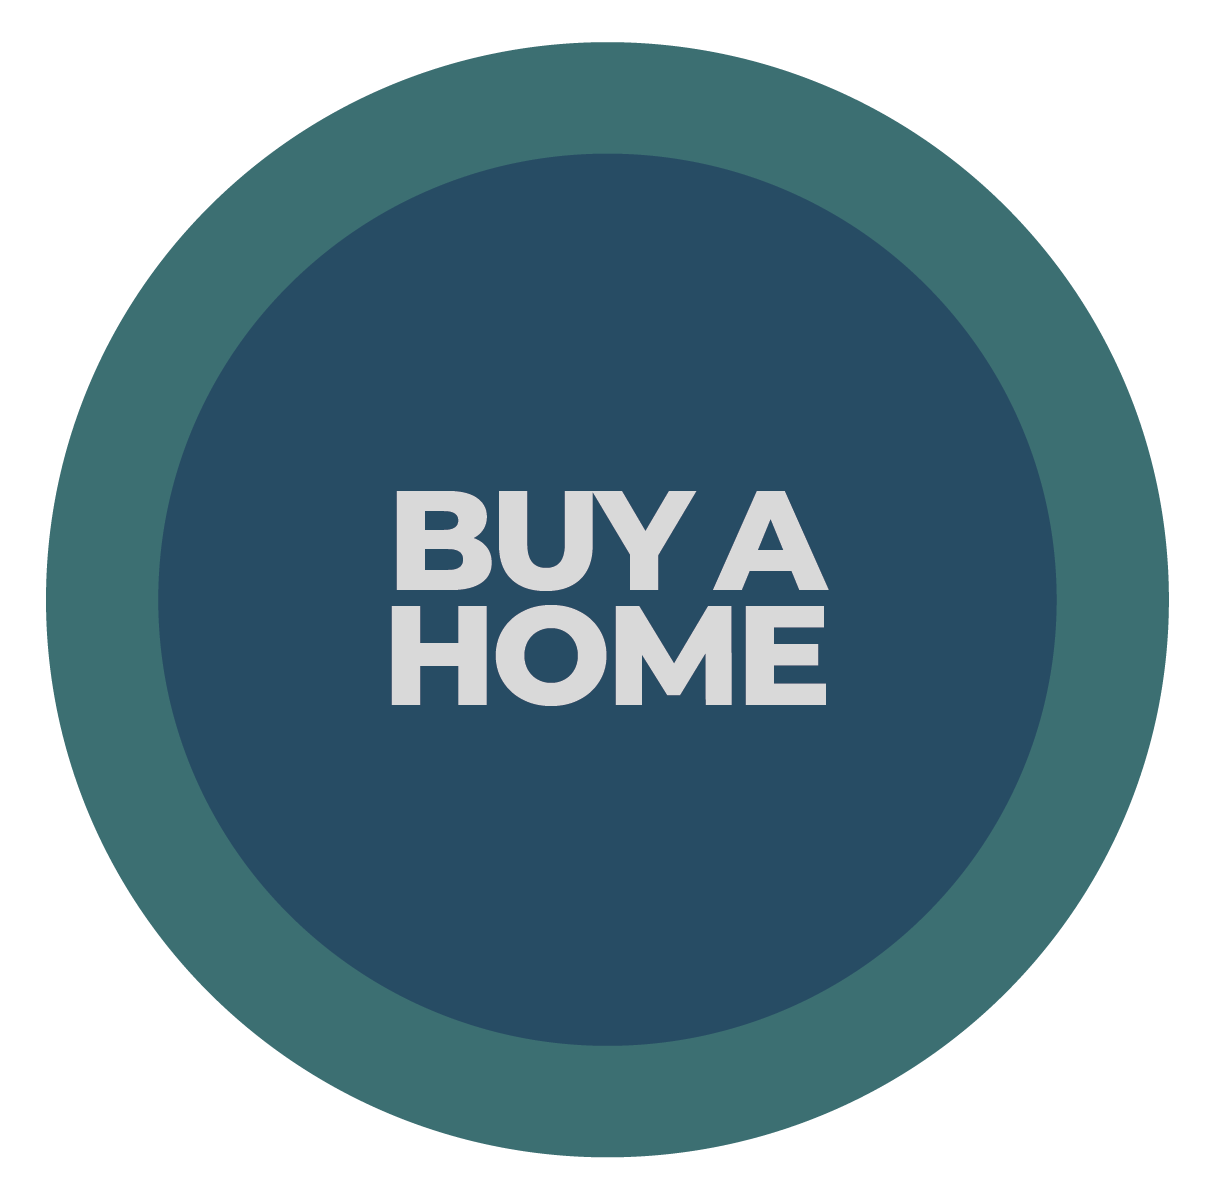 BUY A HOME